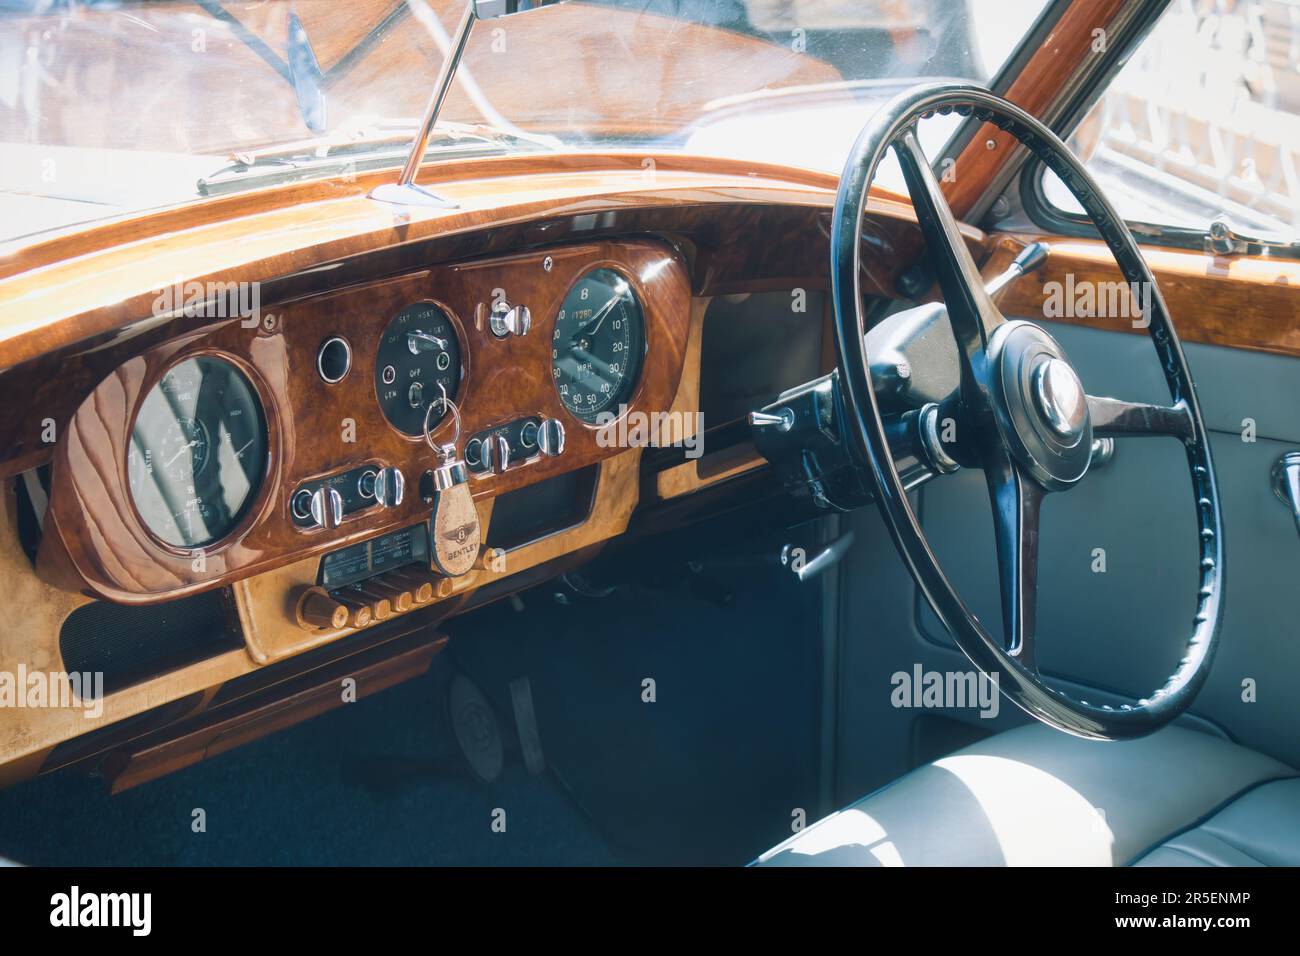 Interior of a Bentley classic car showing the gauges on the walnut dashboard and steering wheel Stock Photo